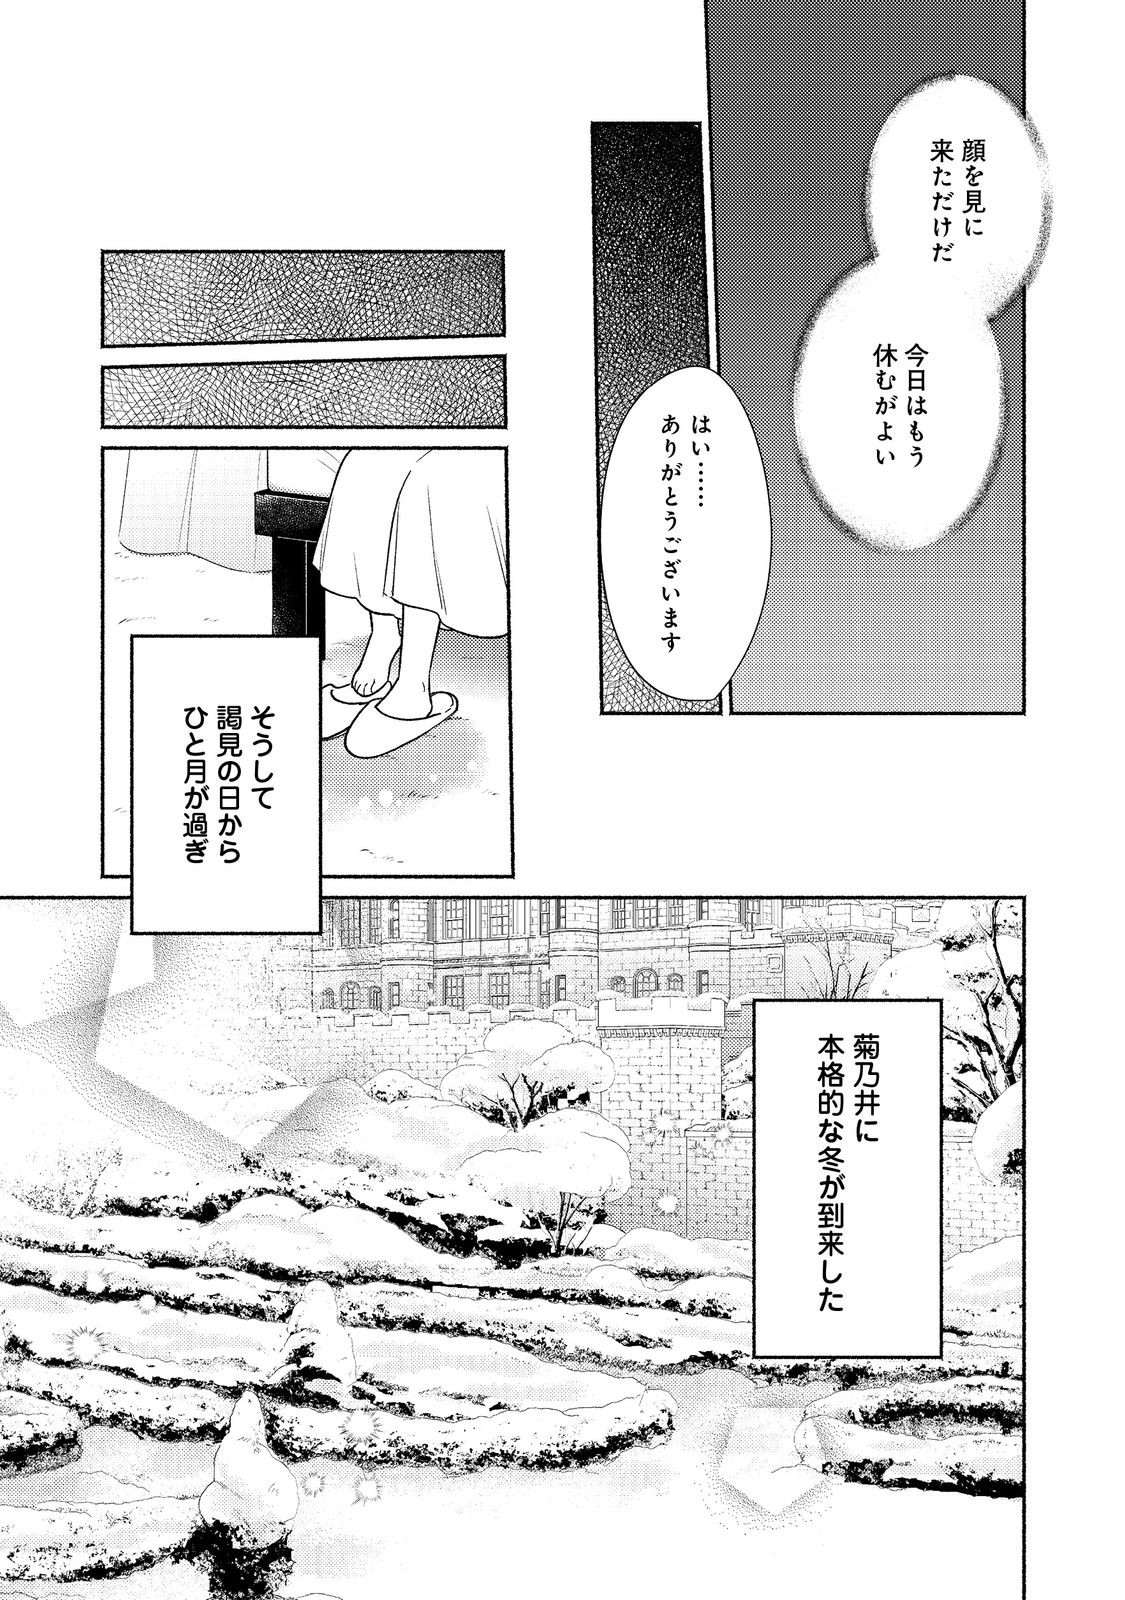 I’m the White Pig Nobleman 第23.2話 - Page 4